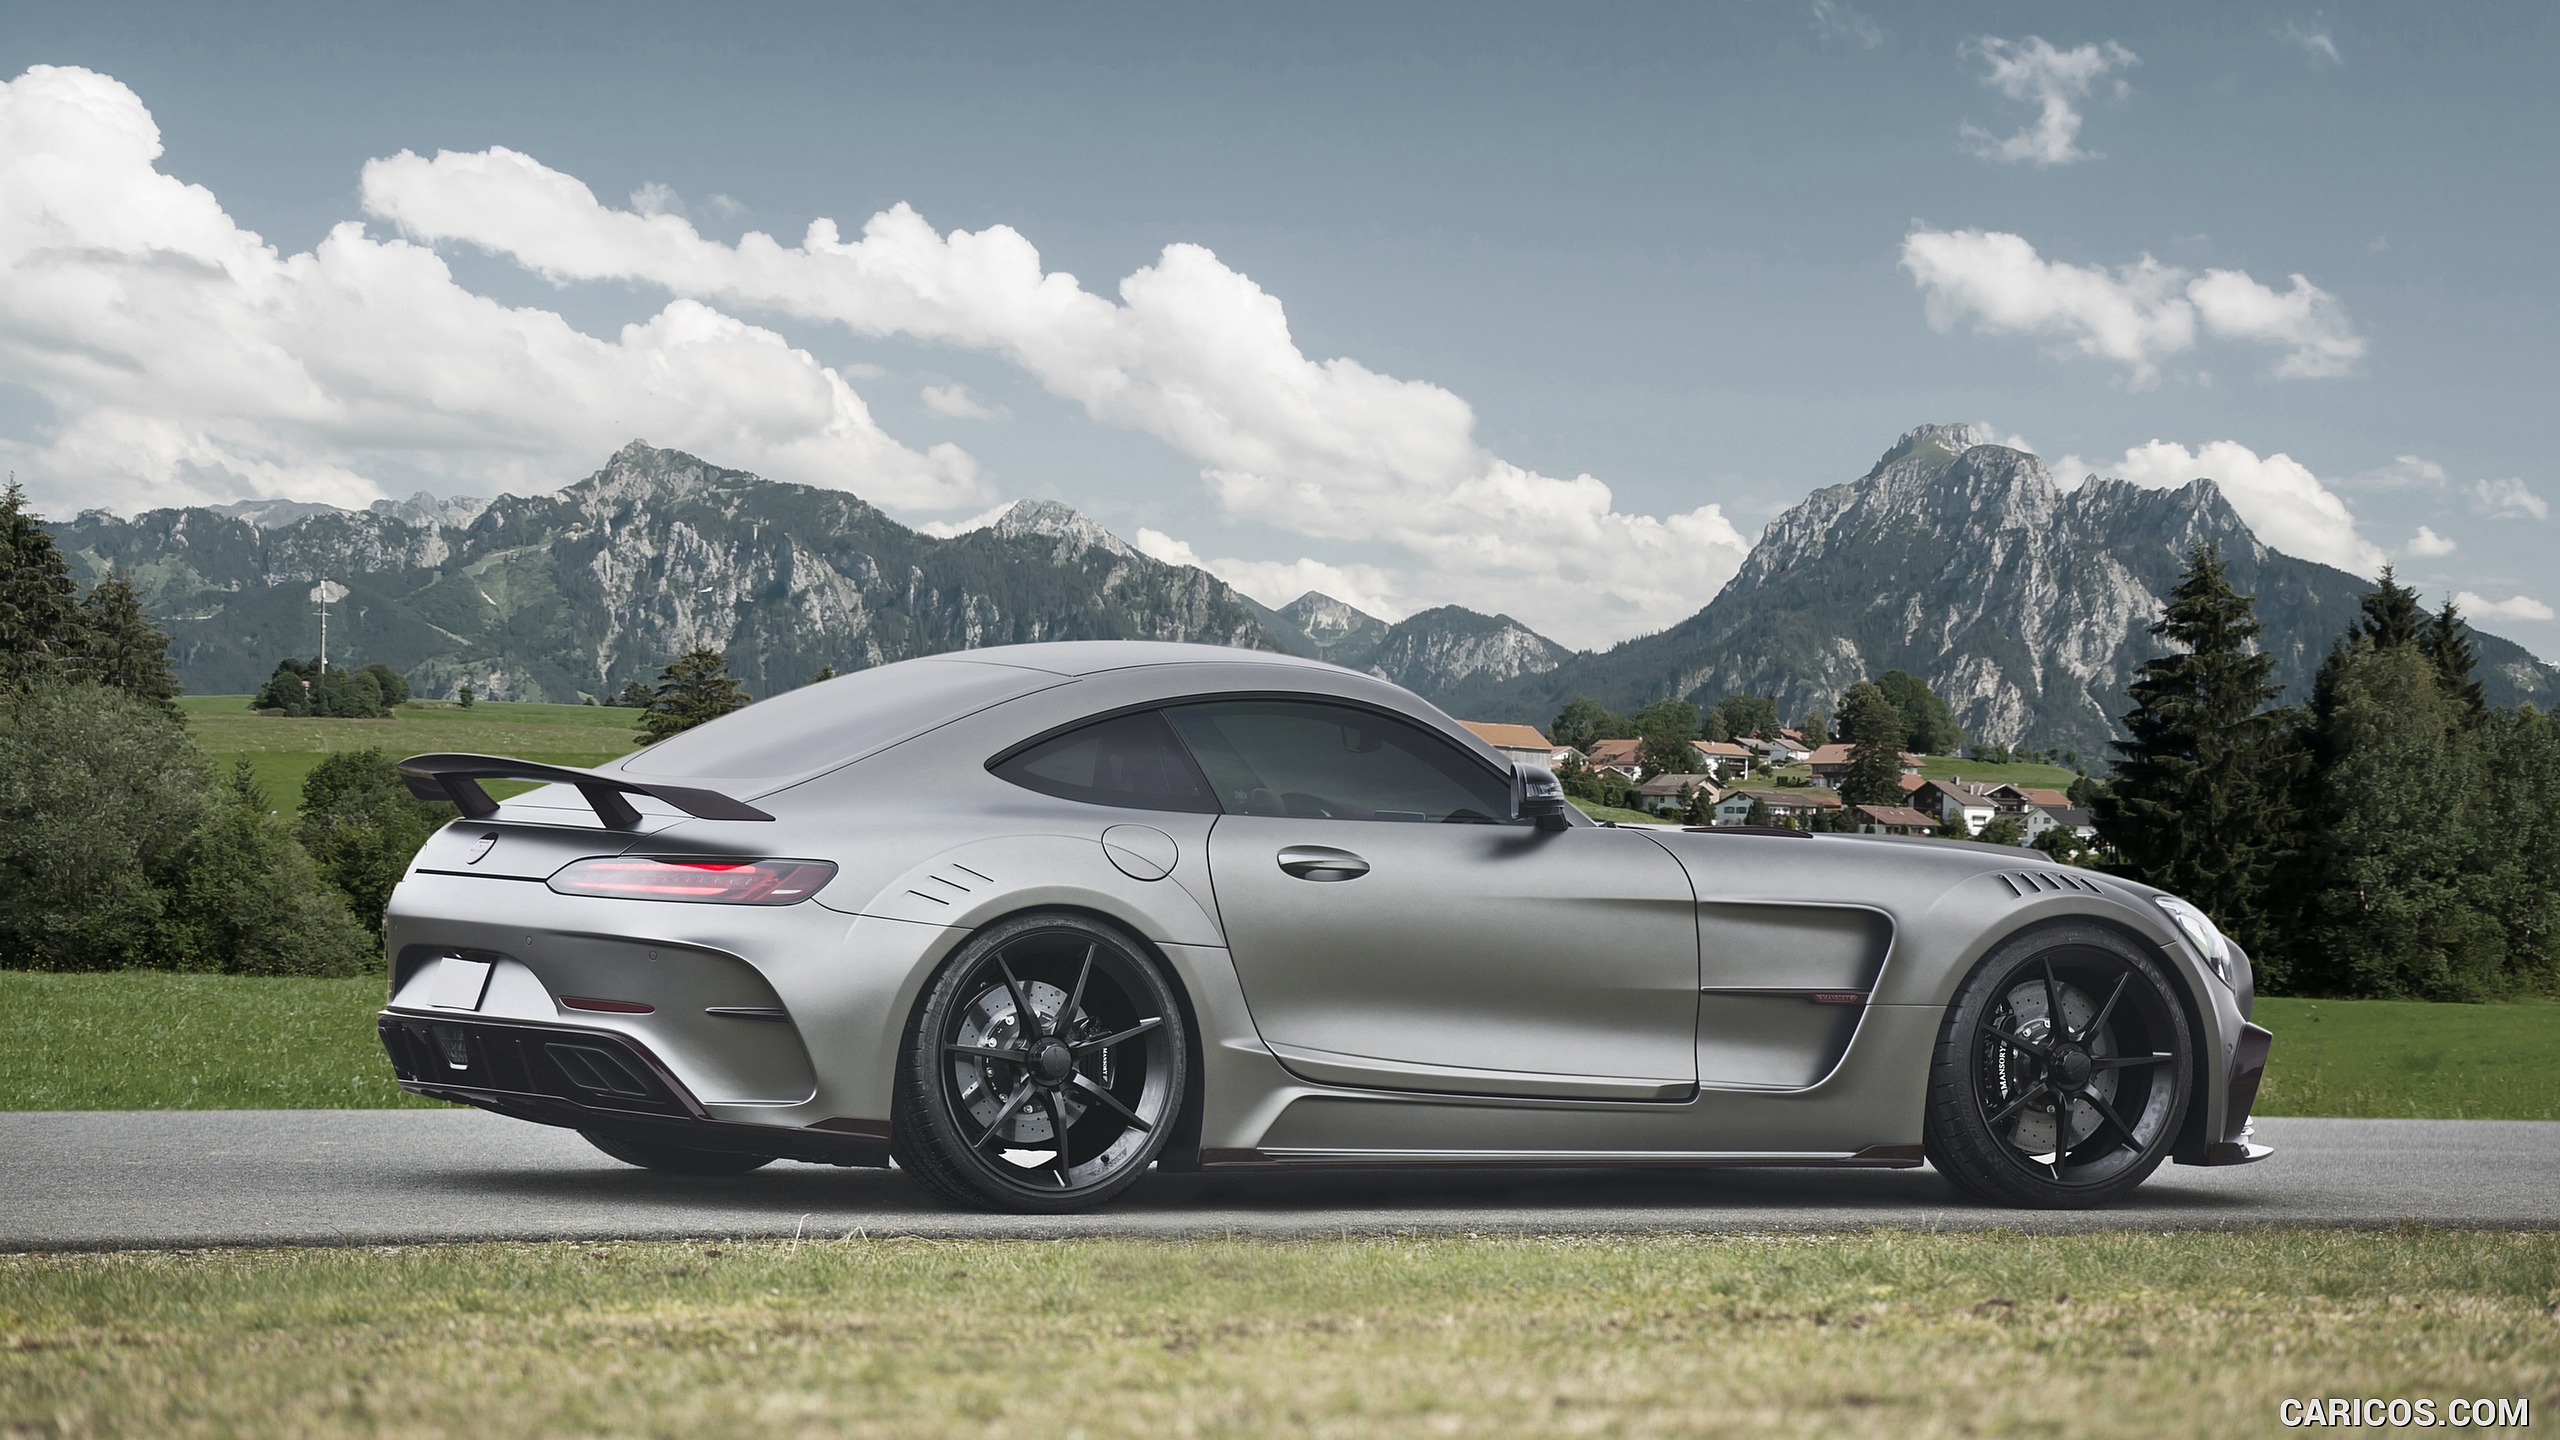 2016 MANSORY Mercedes-AMG GT S - Side, #2 of 10